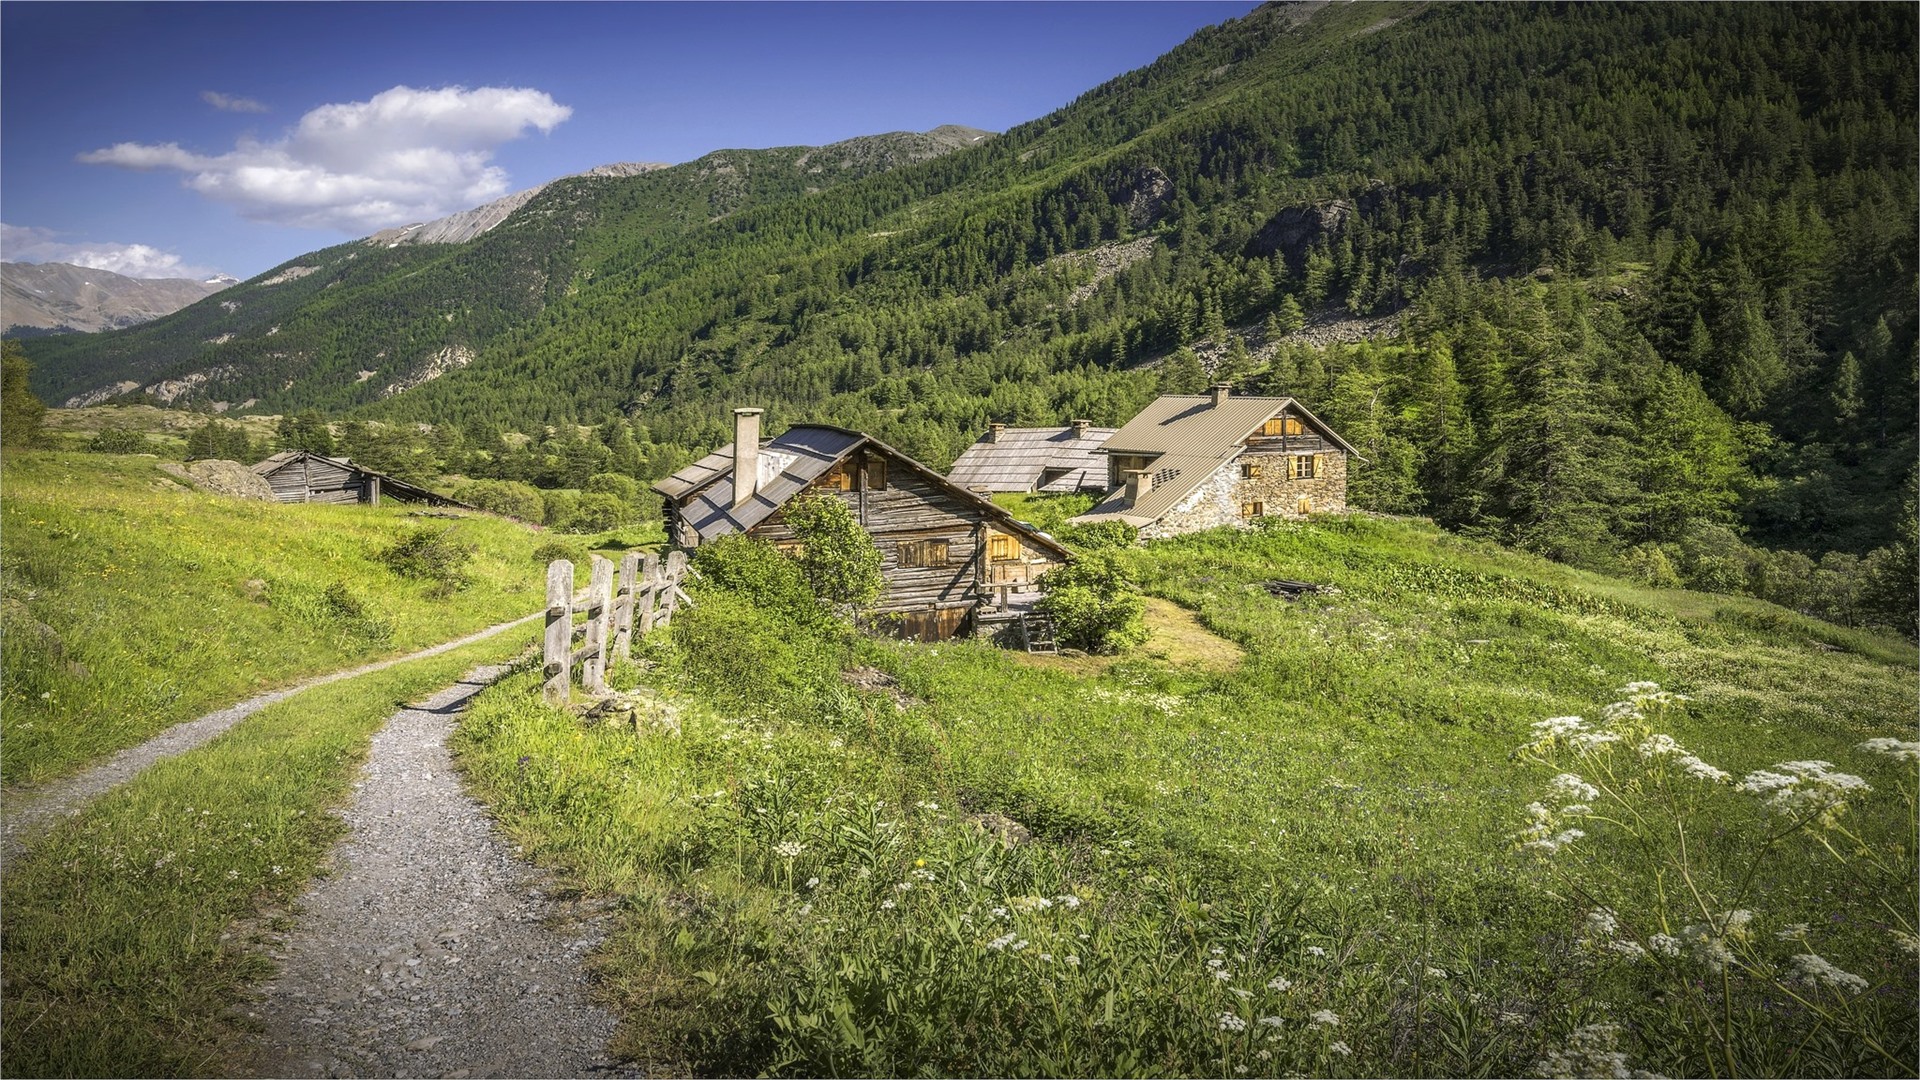 Wallpaper France, Alps, houses, trees, mountains 1920x1080 Full HD 2K Picture, Image